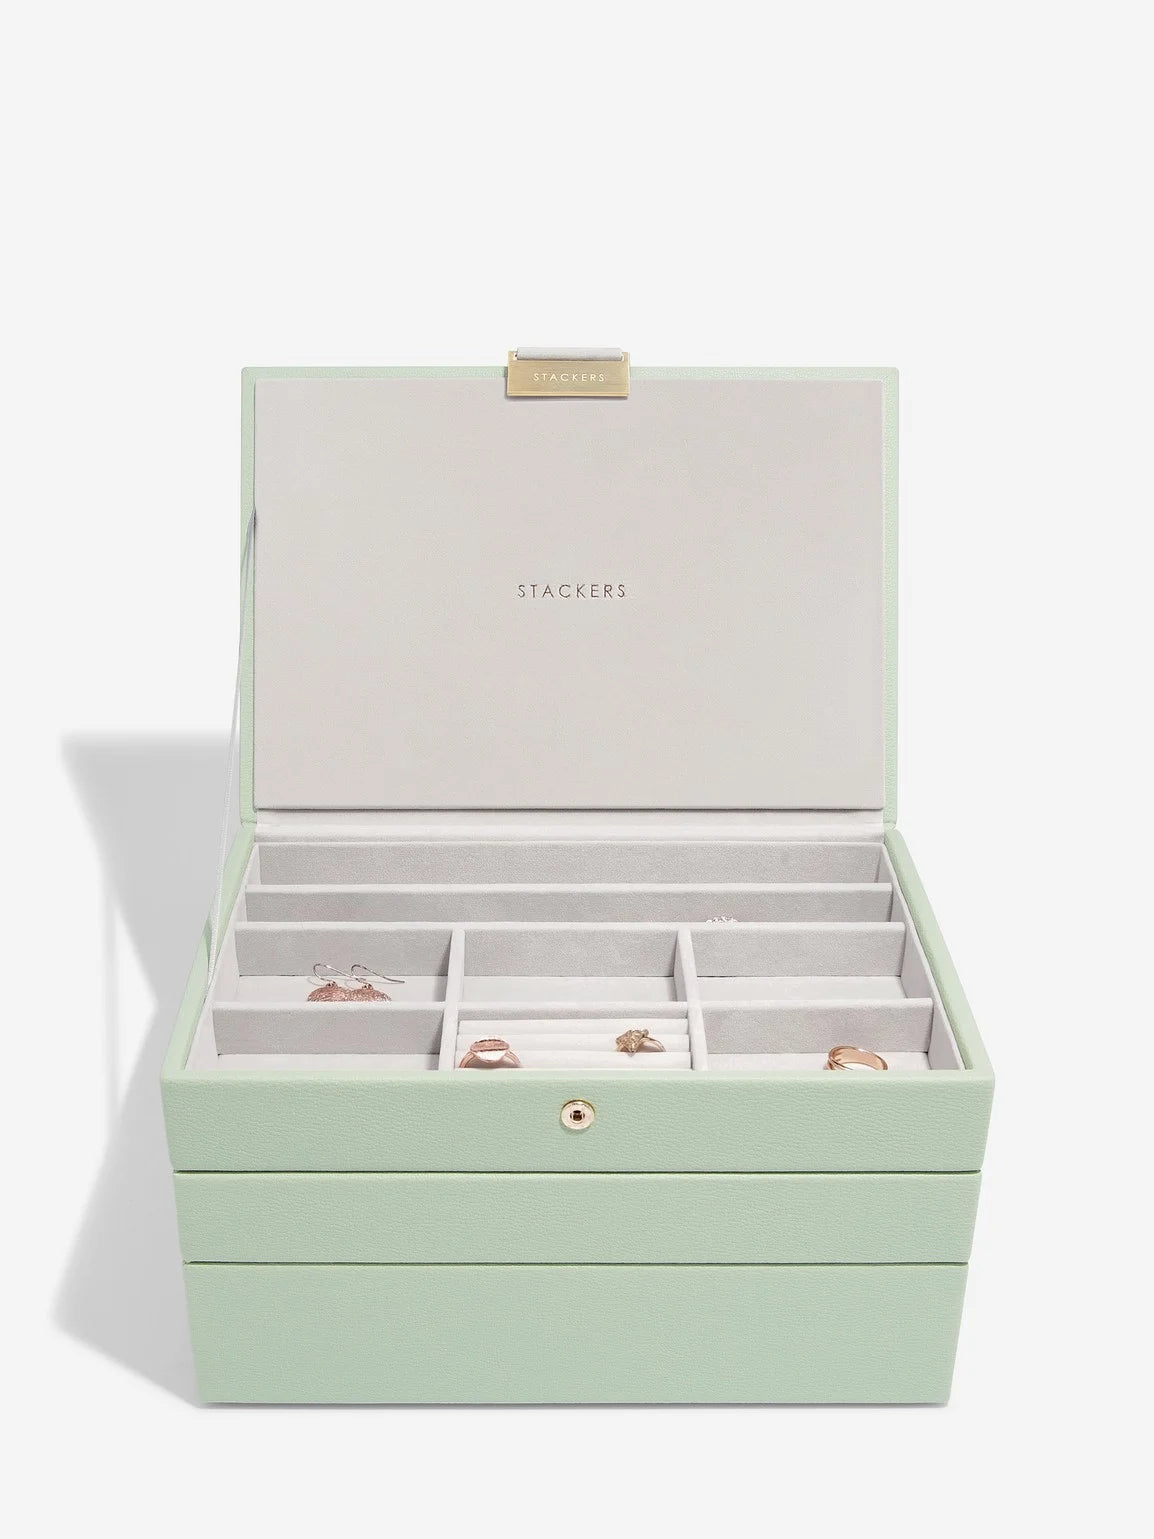 Stackers classic jewellery box - Sage Green.